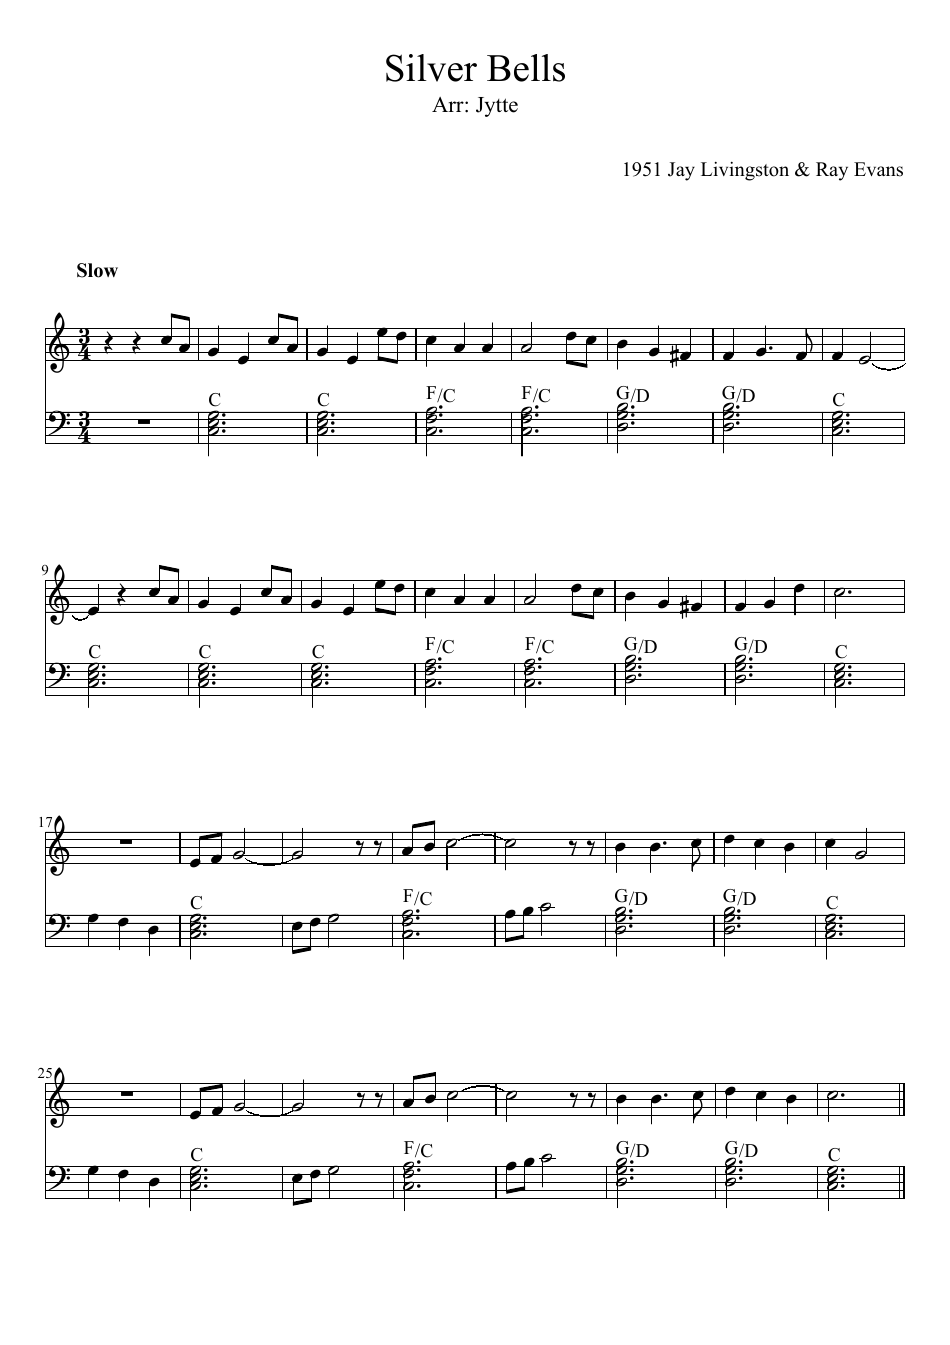 Silver Bells Sheet Music - Jay Livingston and Ray Evans